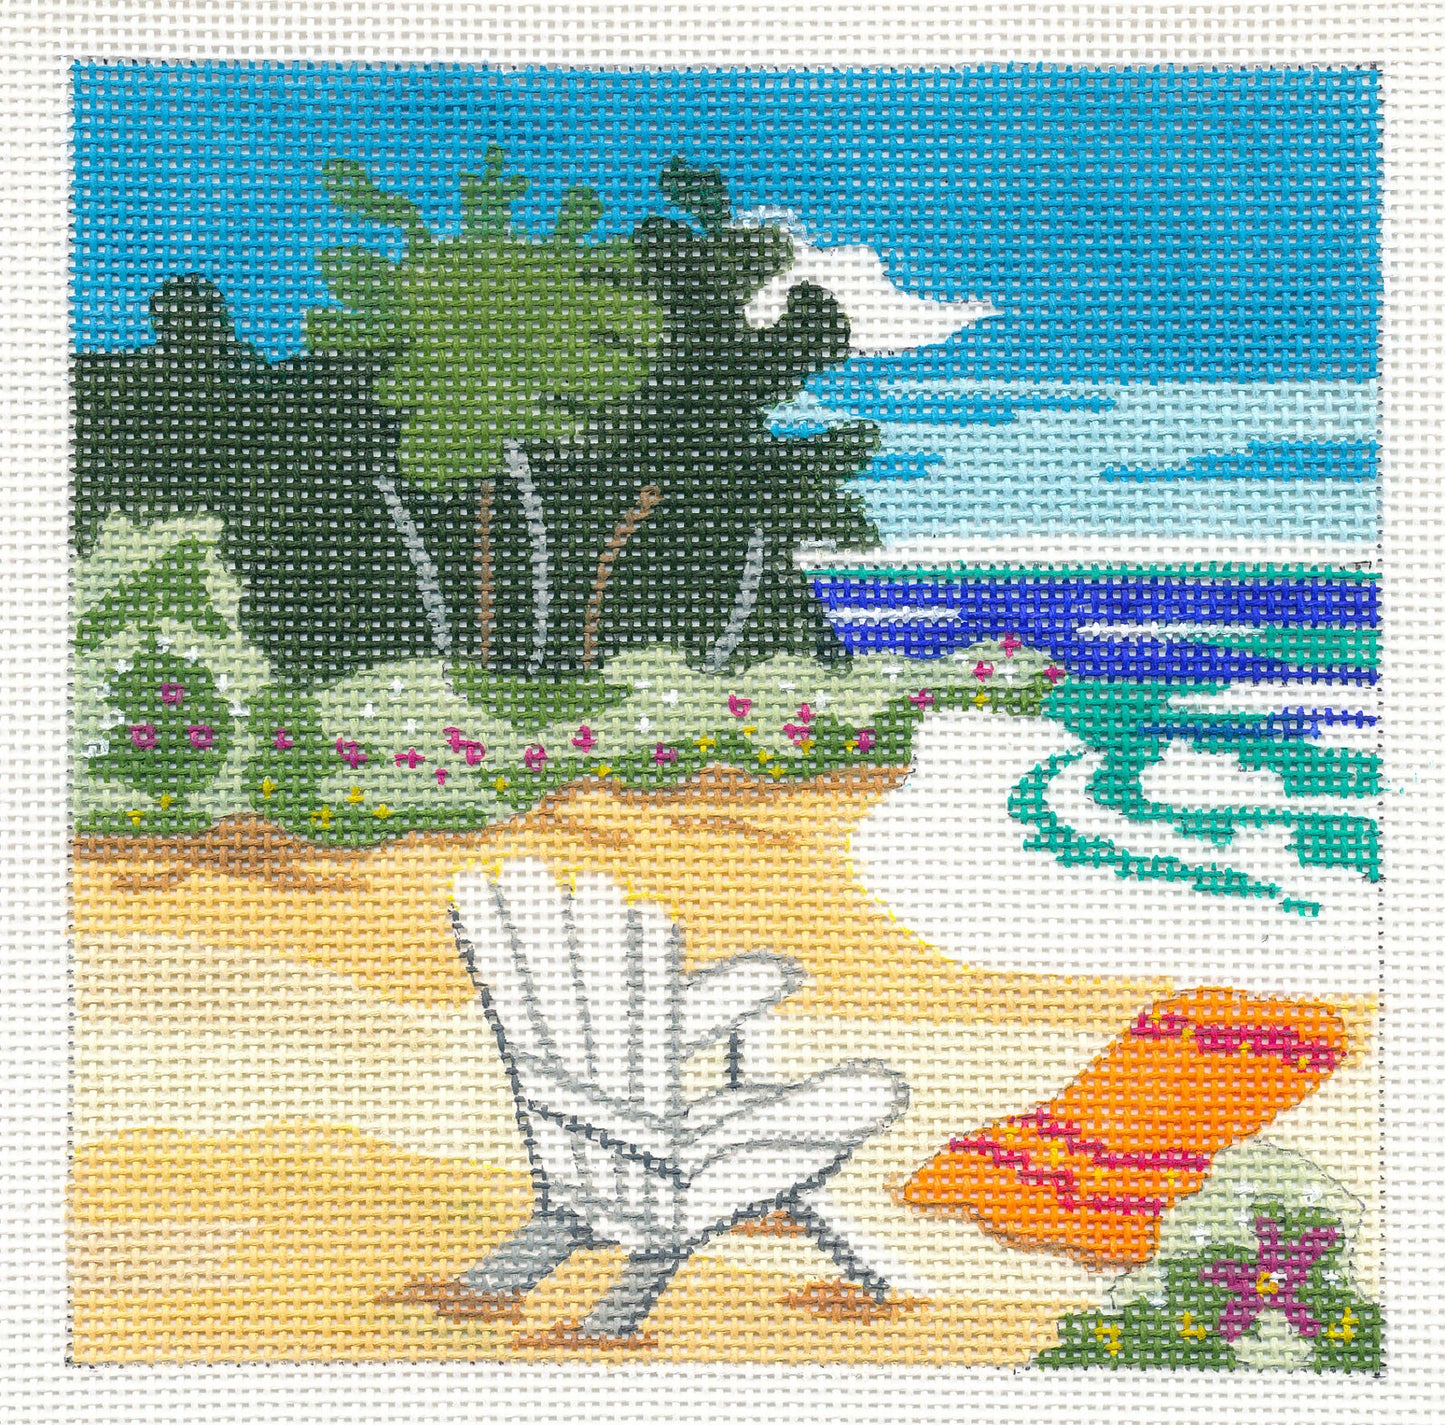 Canvas ~ Serene Beach Day with Stitch Guide on handpainted Needlepoint Canvas by JulieMar